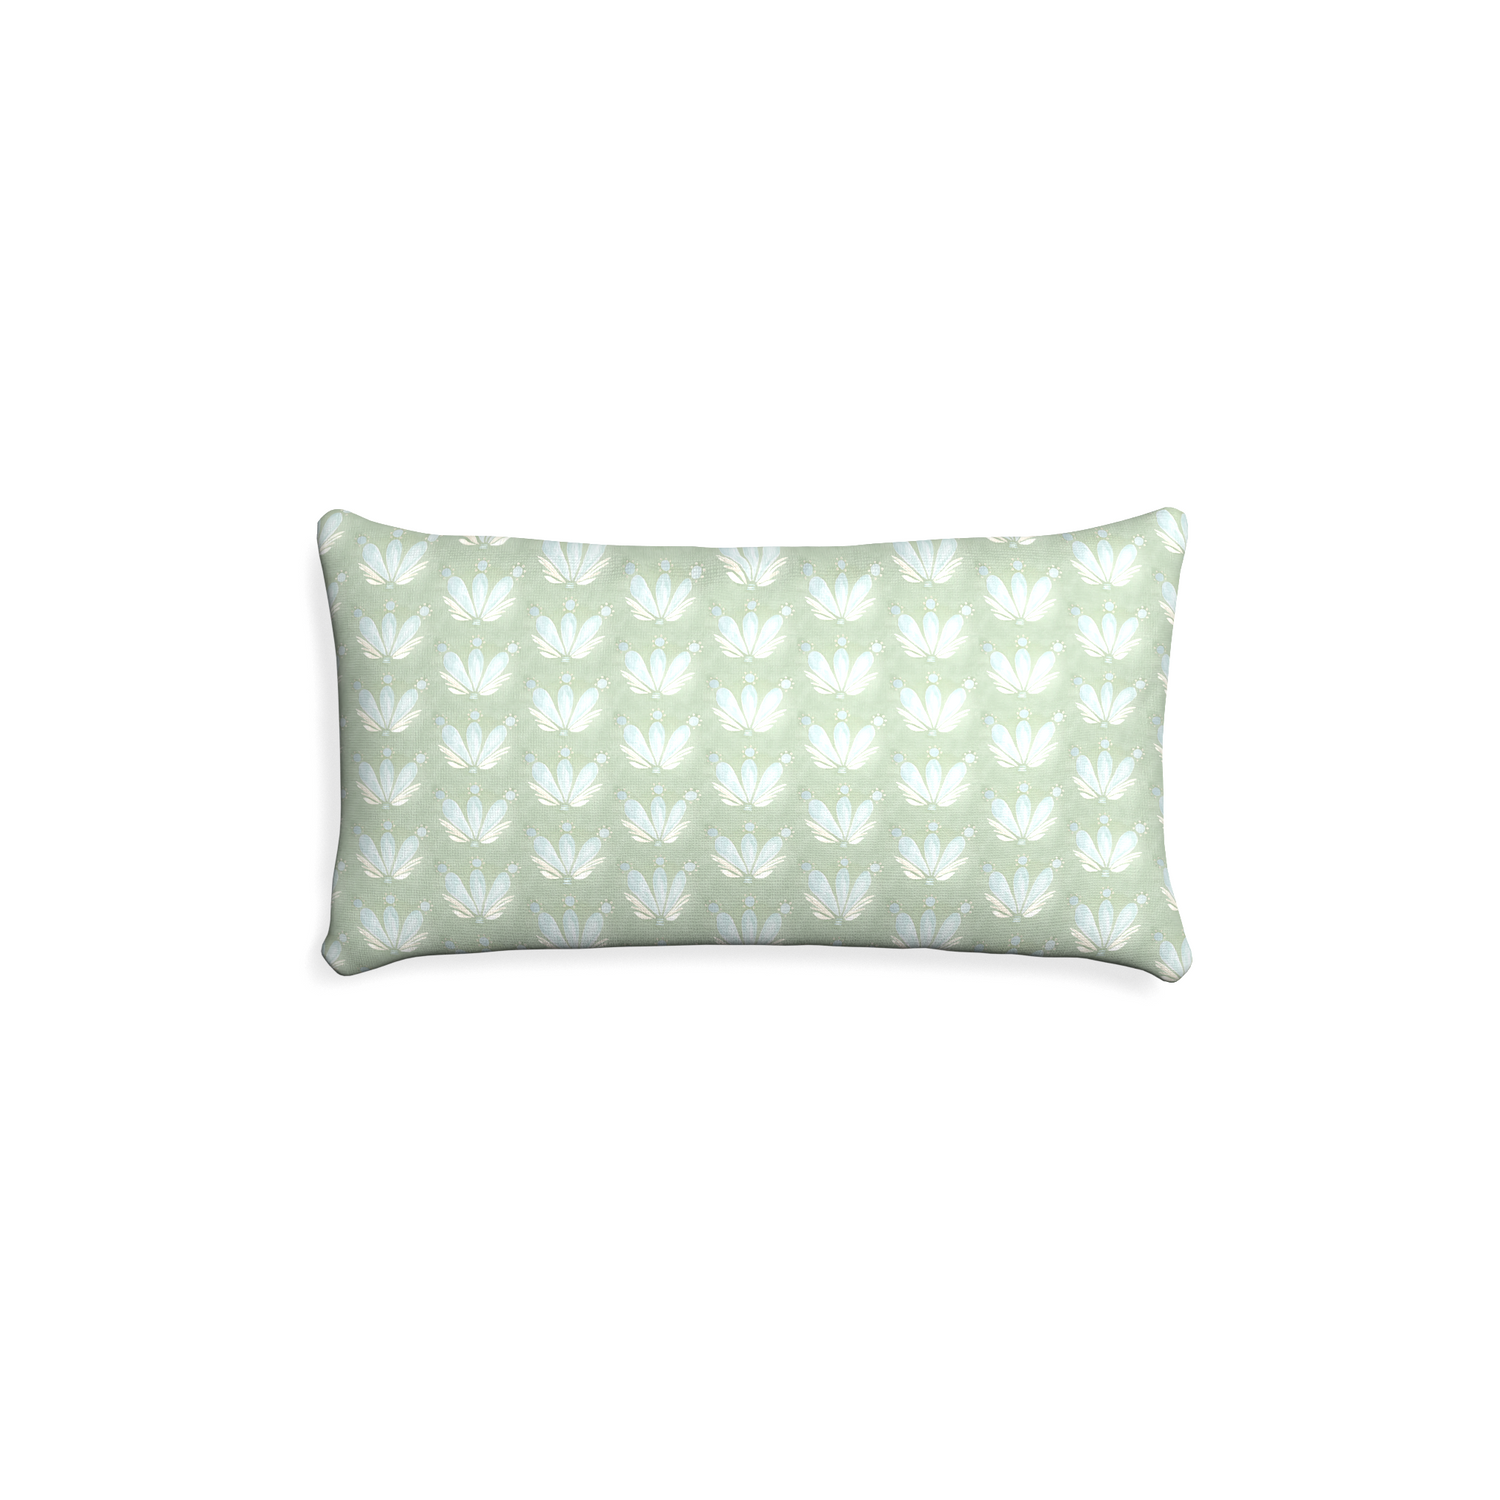 Petite-lumbar serena sea salt custom blue & green floral drop repeatpillow with none on white background